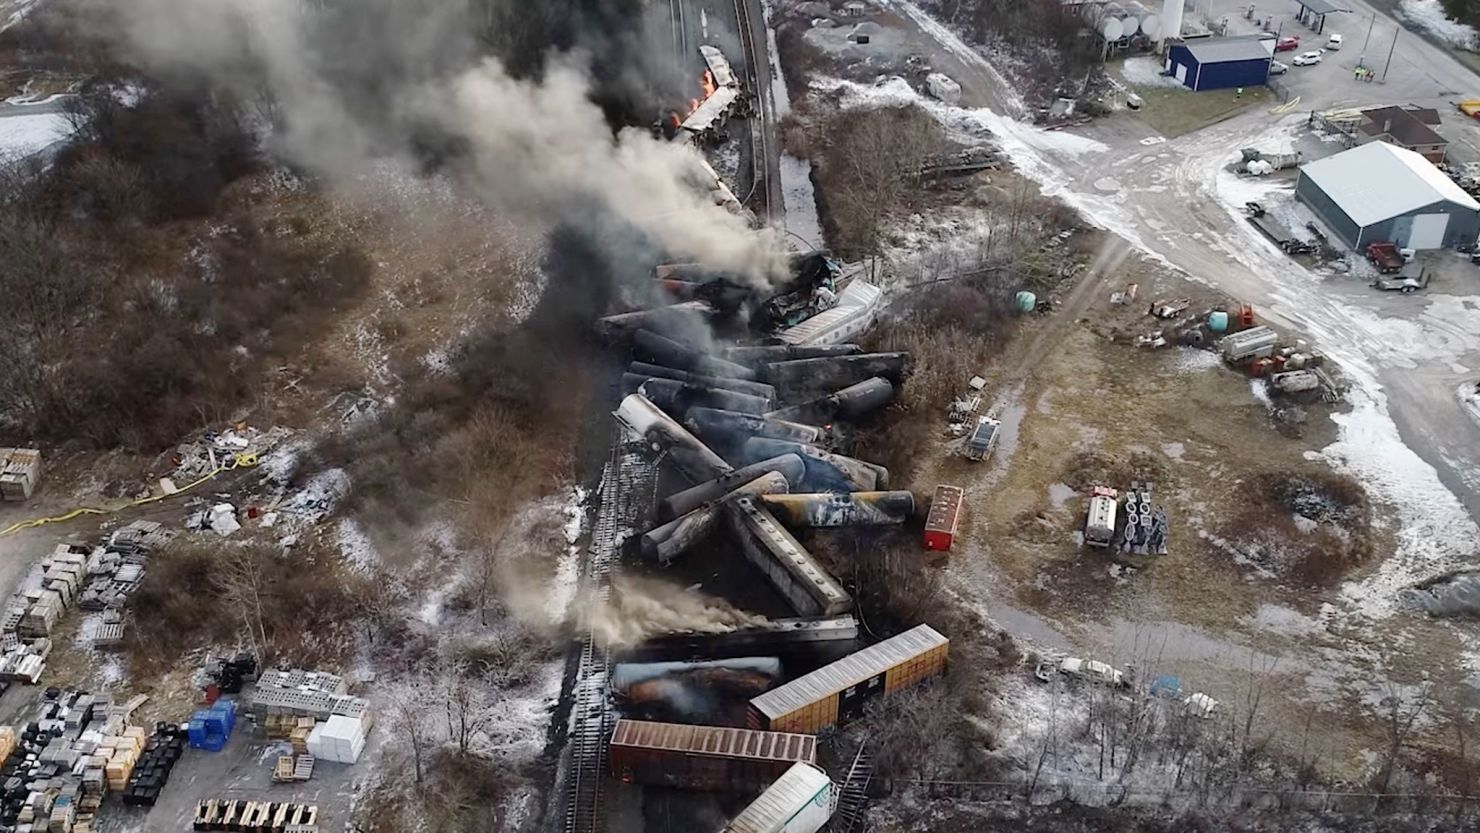 Drone footage shows the freight train derailment in East Palestine, Ohio, on Feb. 6, 2023.